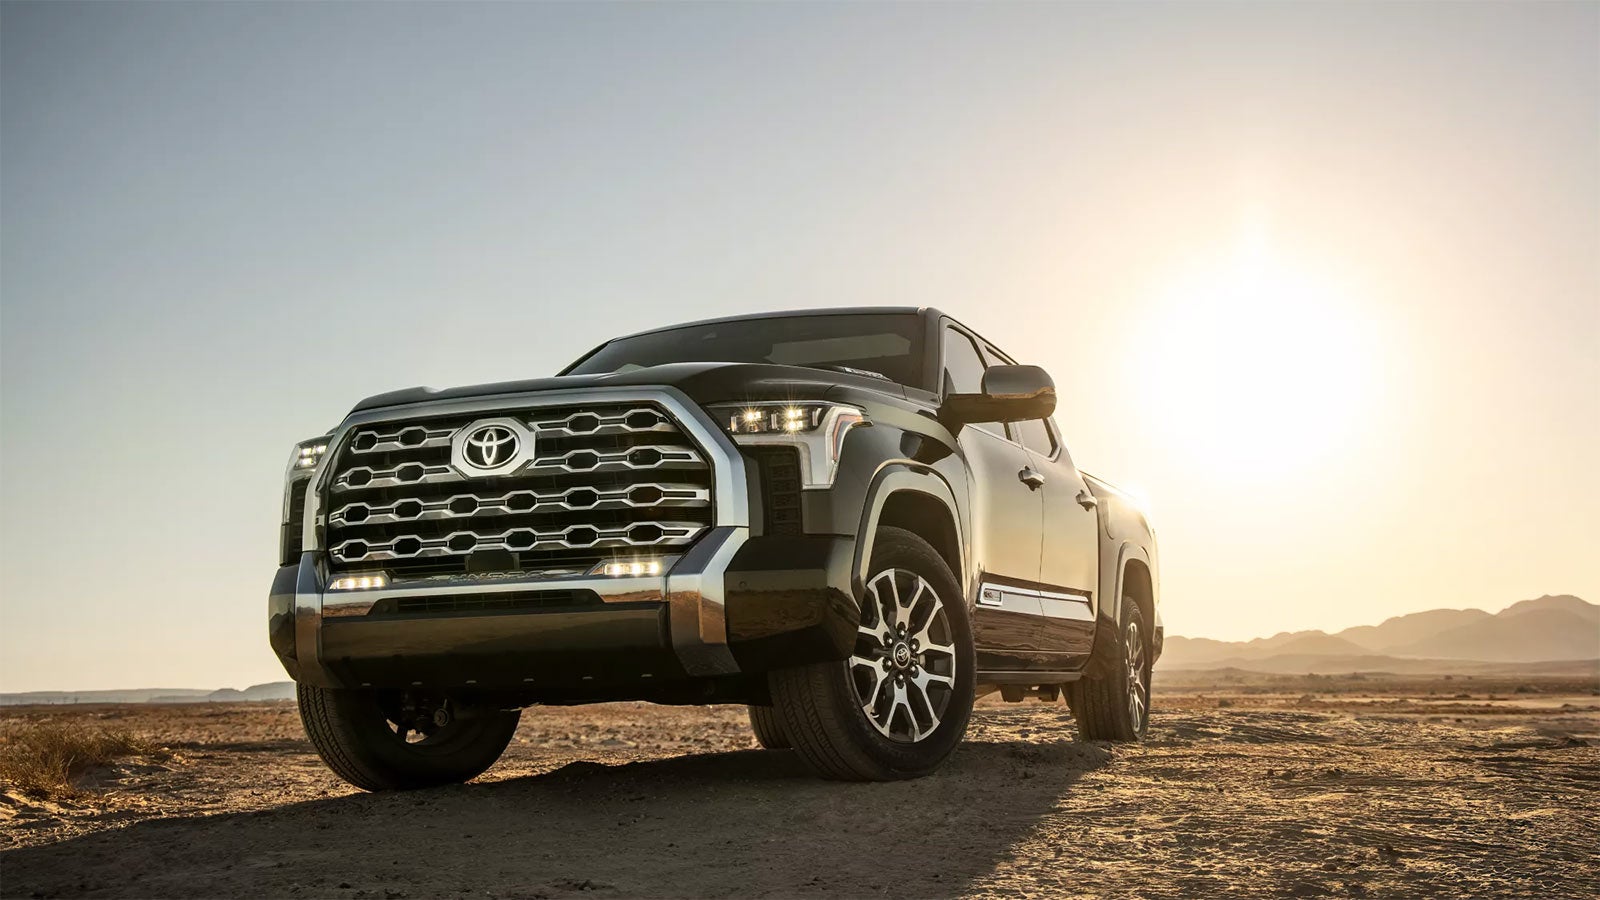 2022 Toyota Tundra Gallery | All Star Toyota of Baton Rouge in Baton Rouge LA